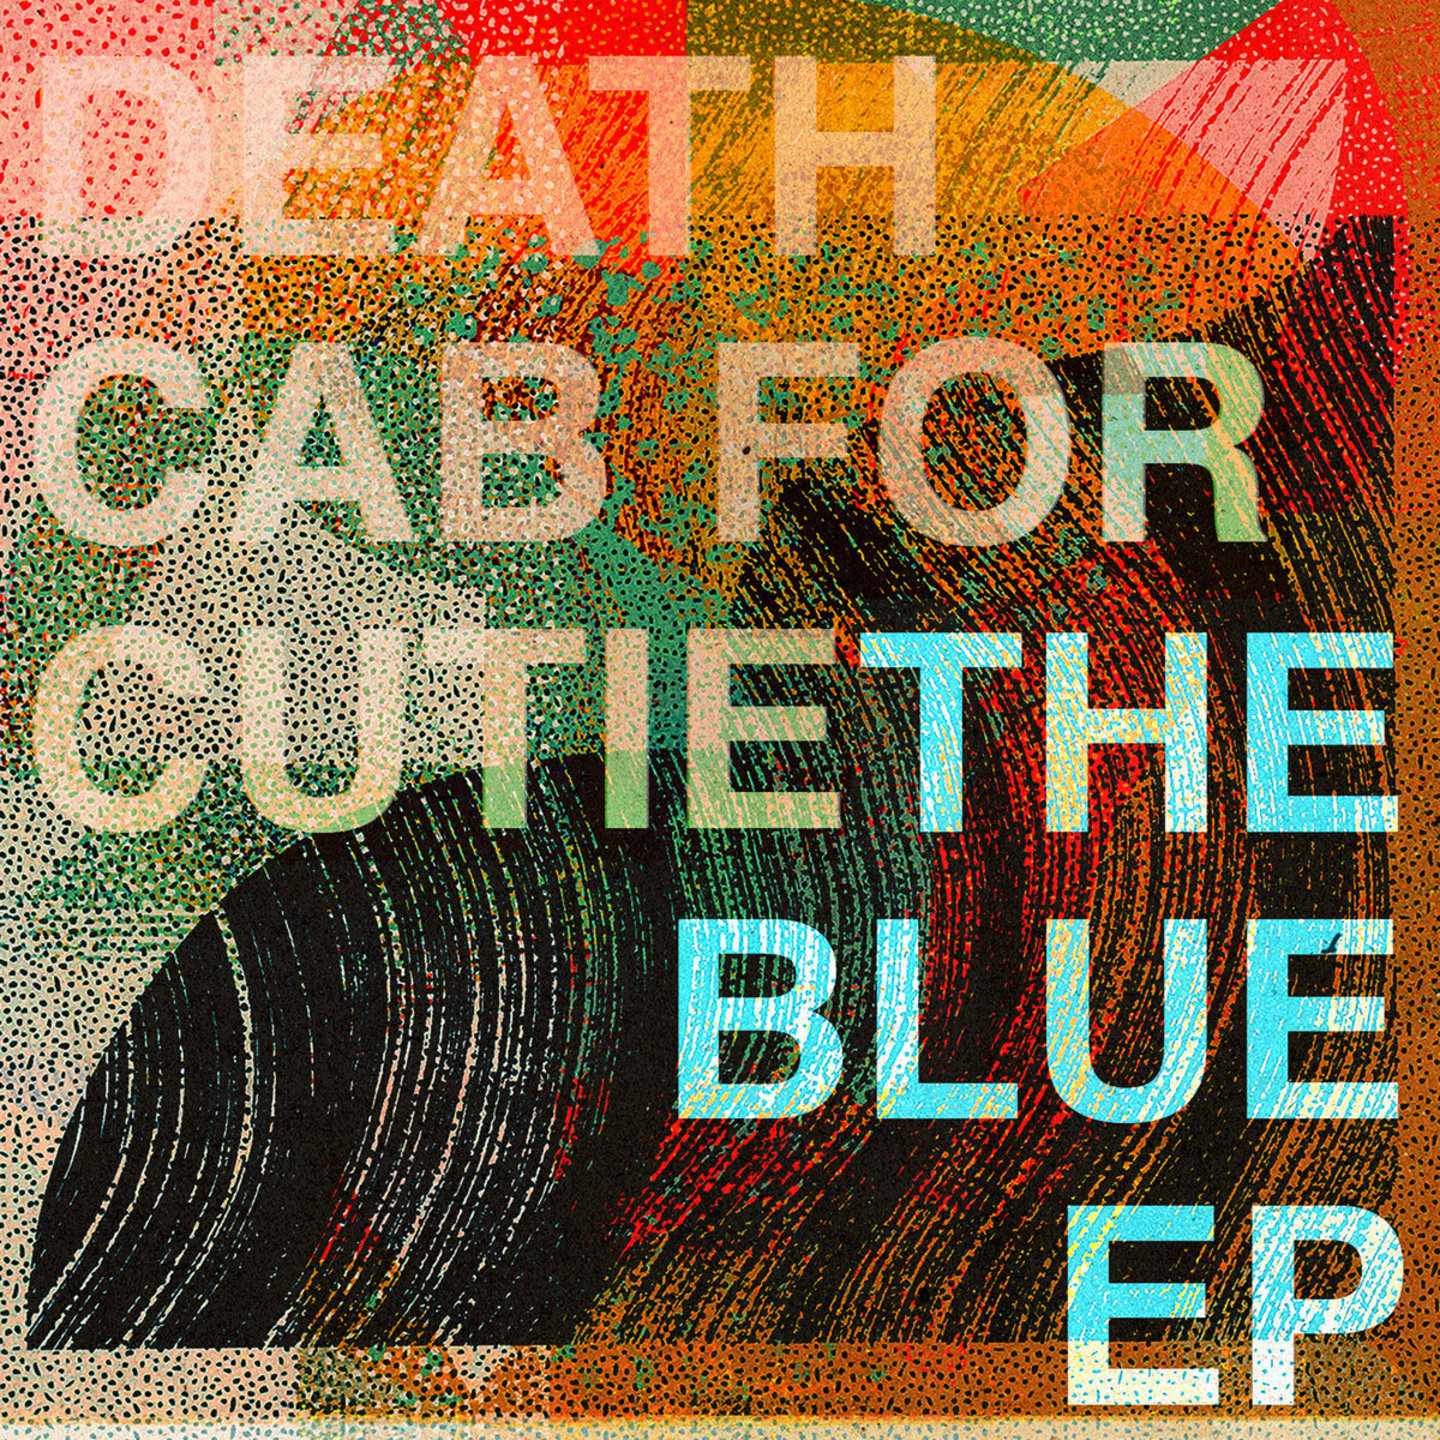 DEATH CAB FOR CUTIE - The Blue EP 12EP